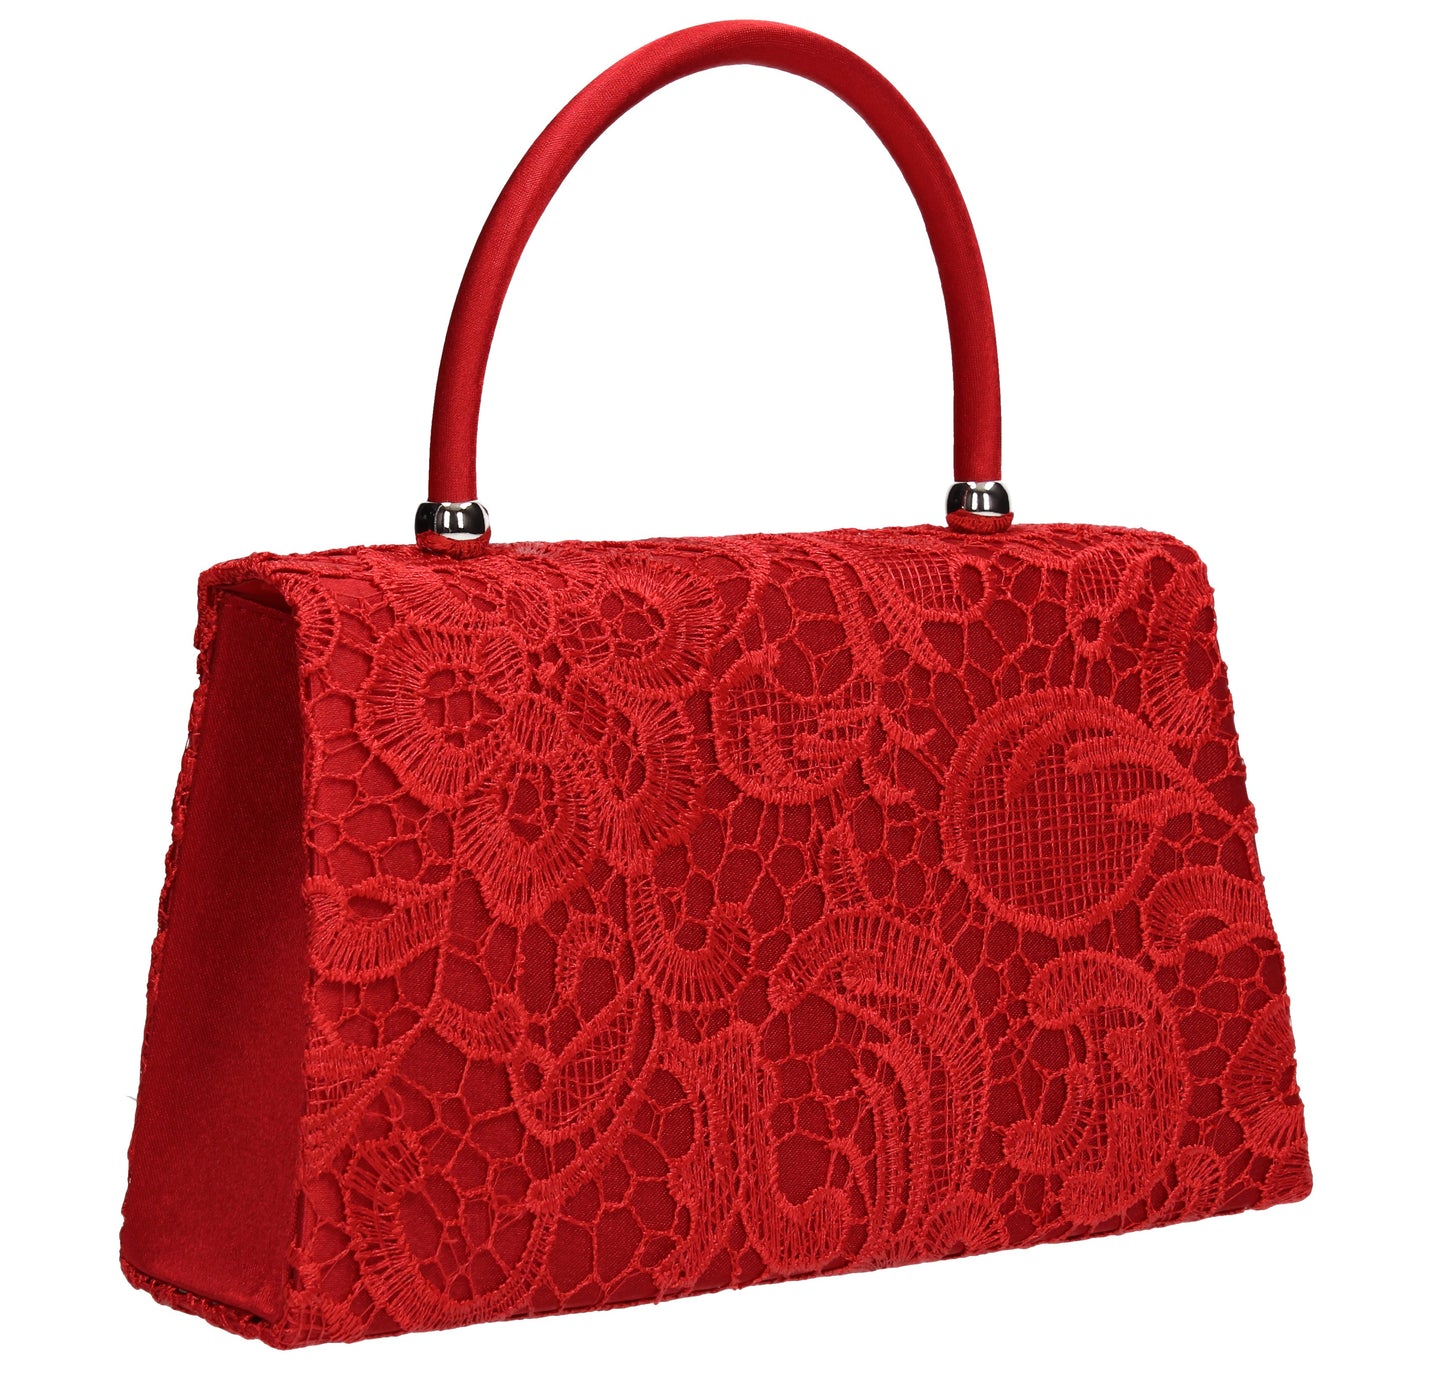 Kendall Lace Clutch Bag Red